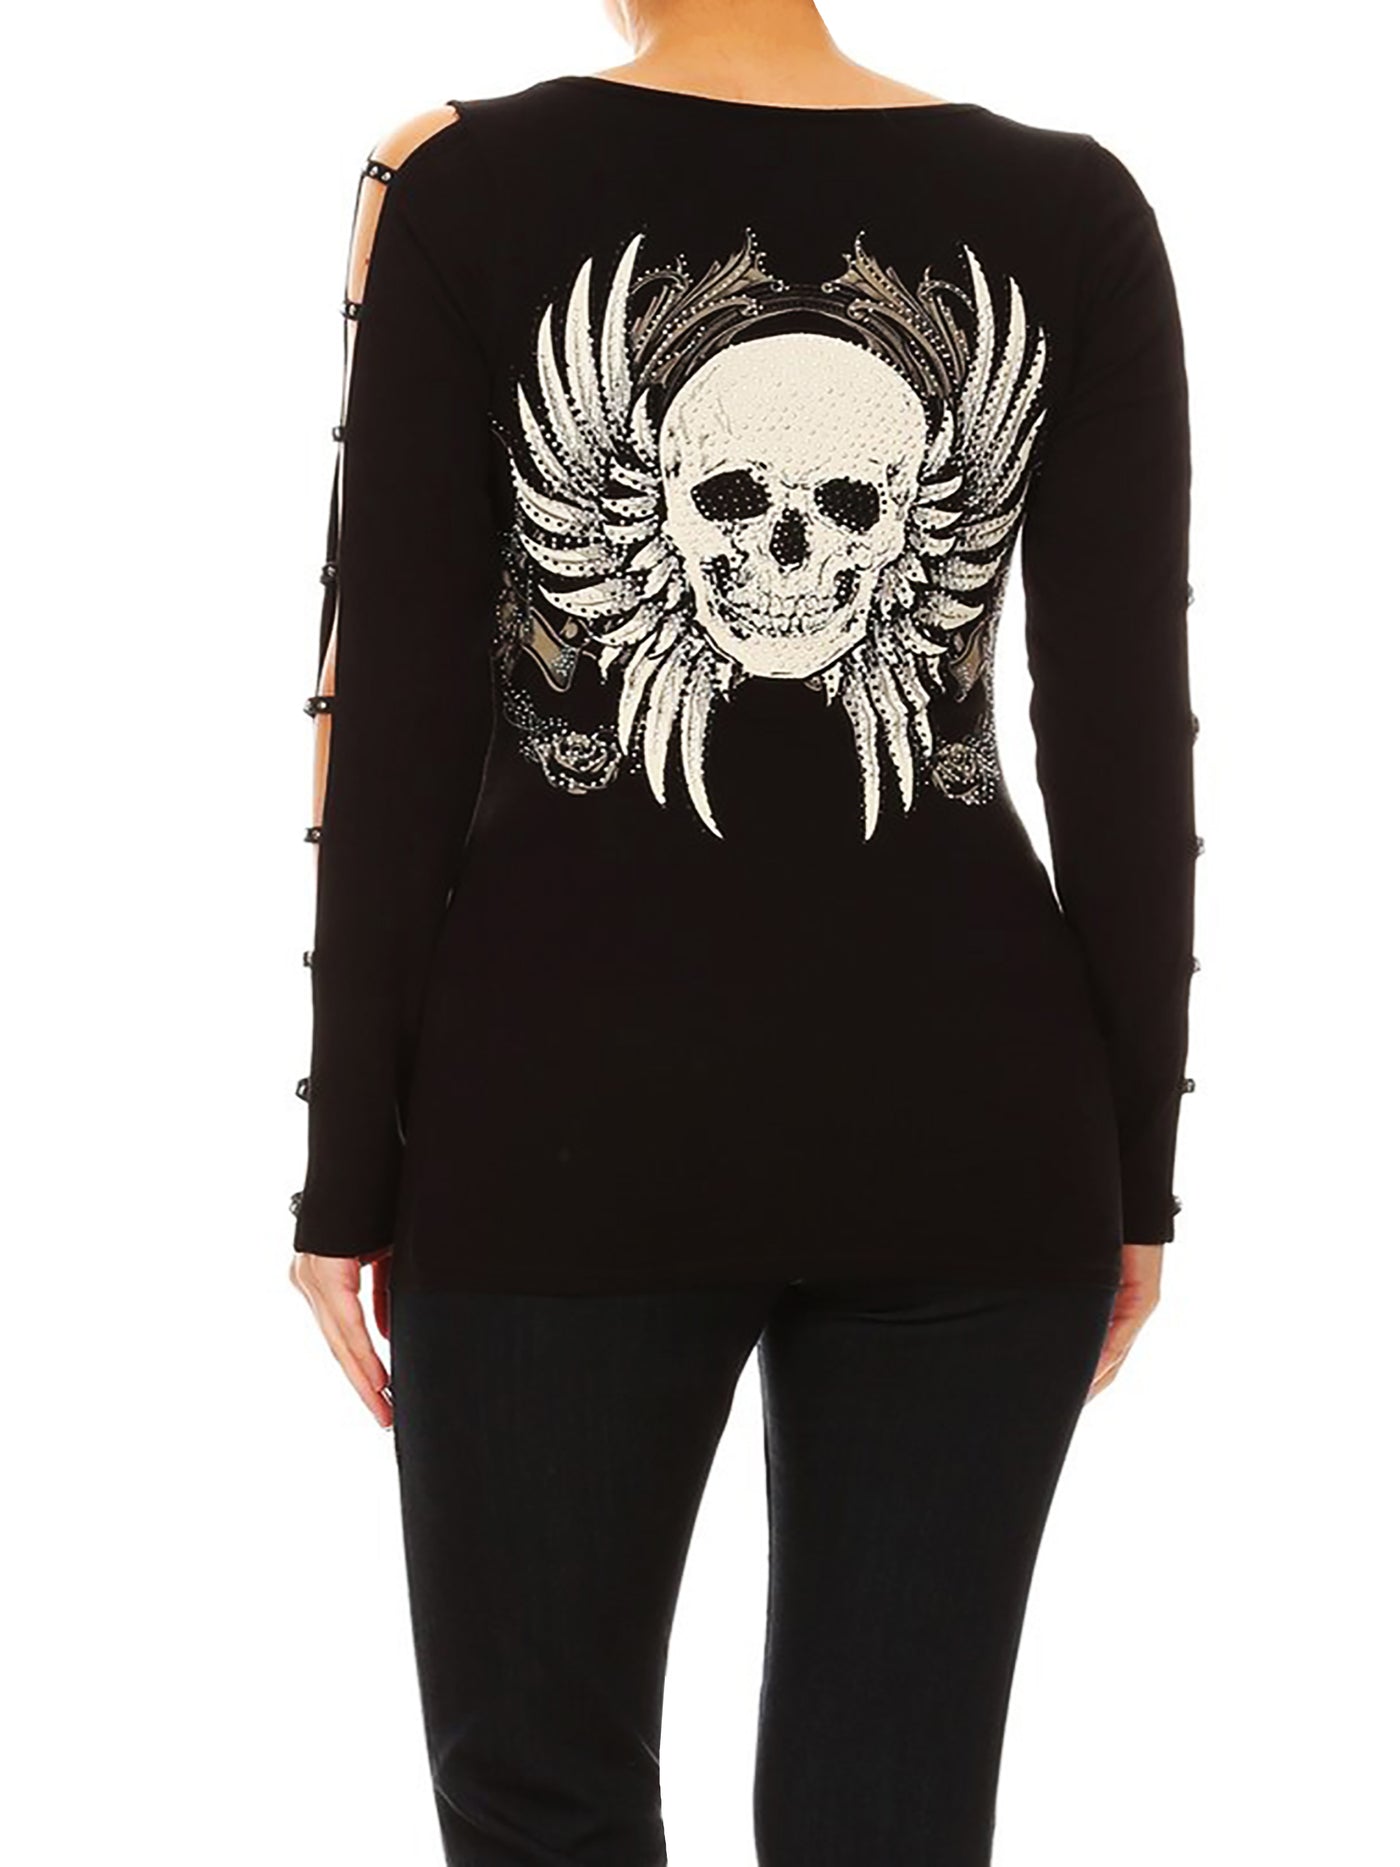 Plus Size Tops | Gothic Skull Tattoo V-Neck Top | Made In USA | Funfash